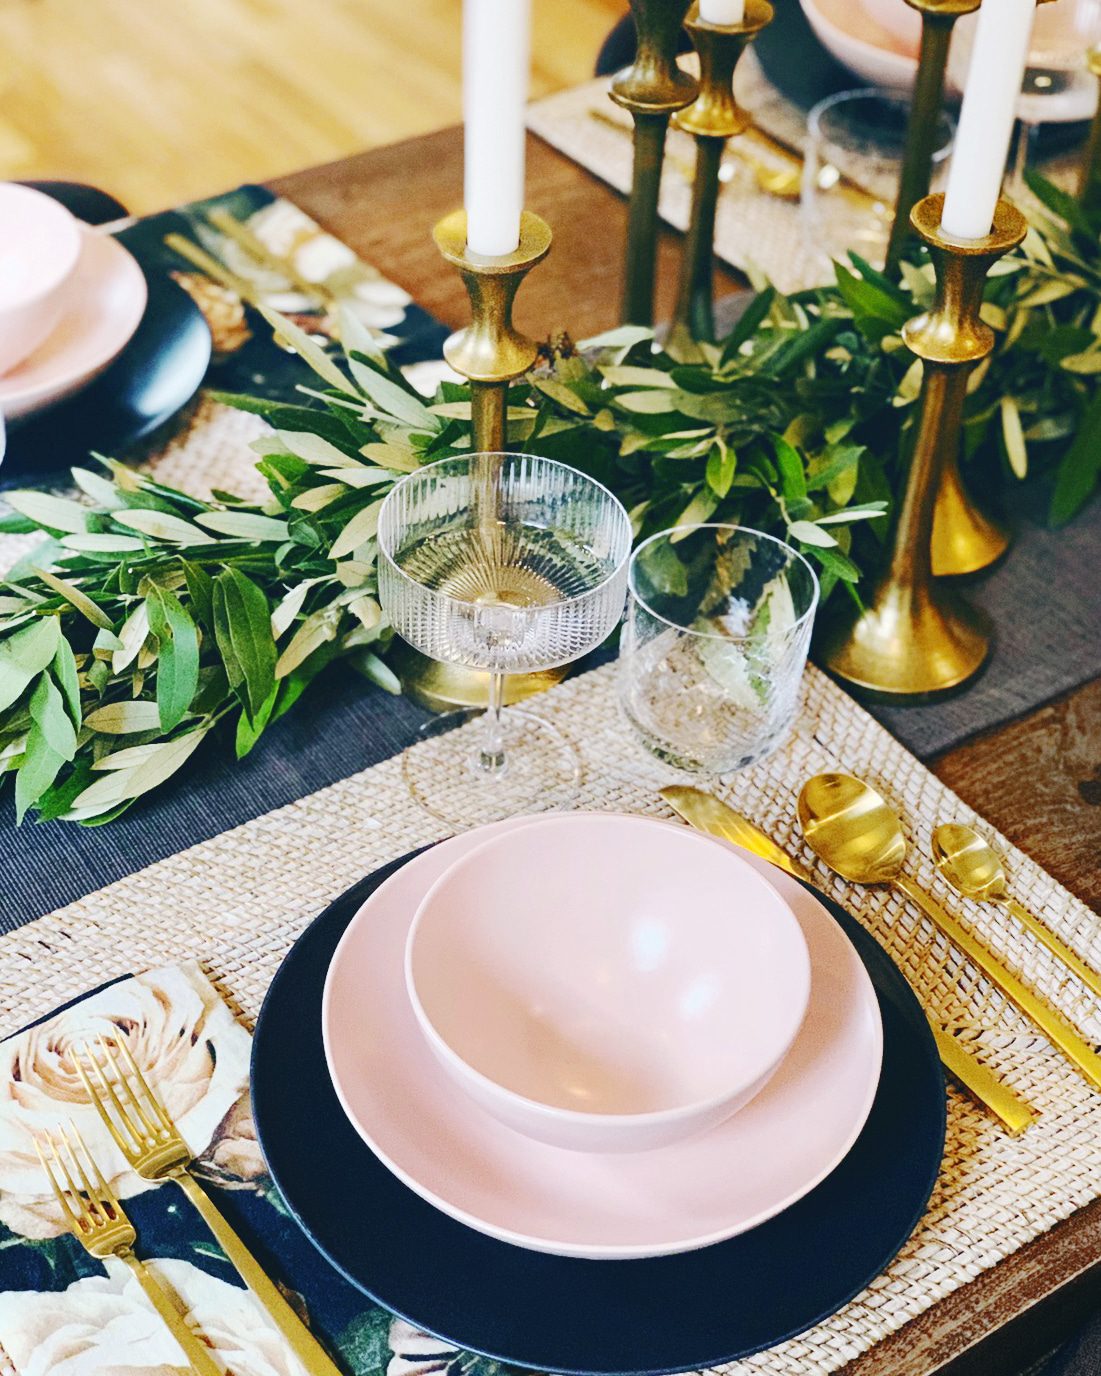 Valentine's Day place setting ideas // via Yellow Brick Home